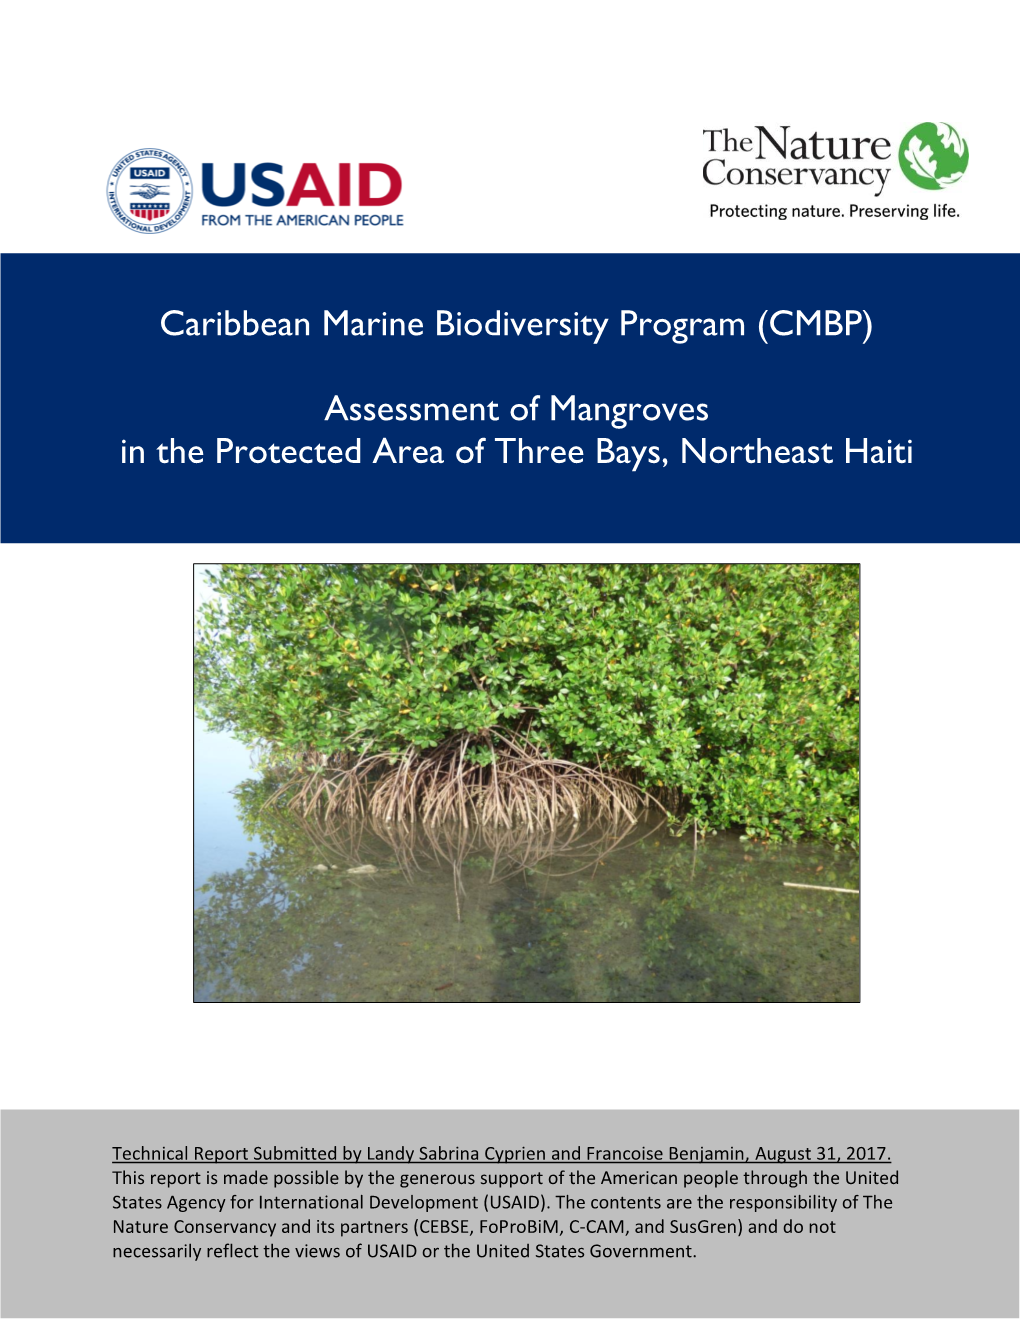 Assessment of Mangroves in the Protected Area of Three Bays, Northeast Haiti